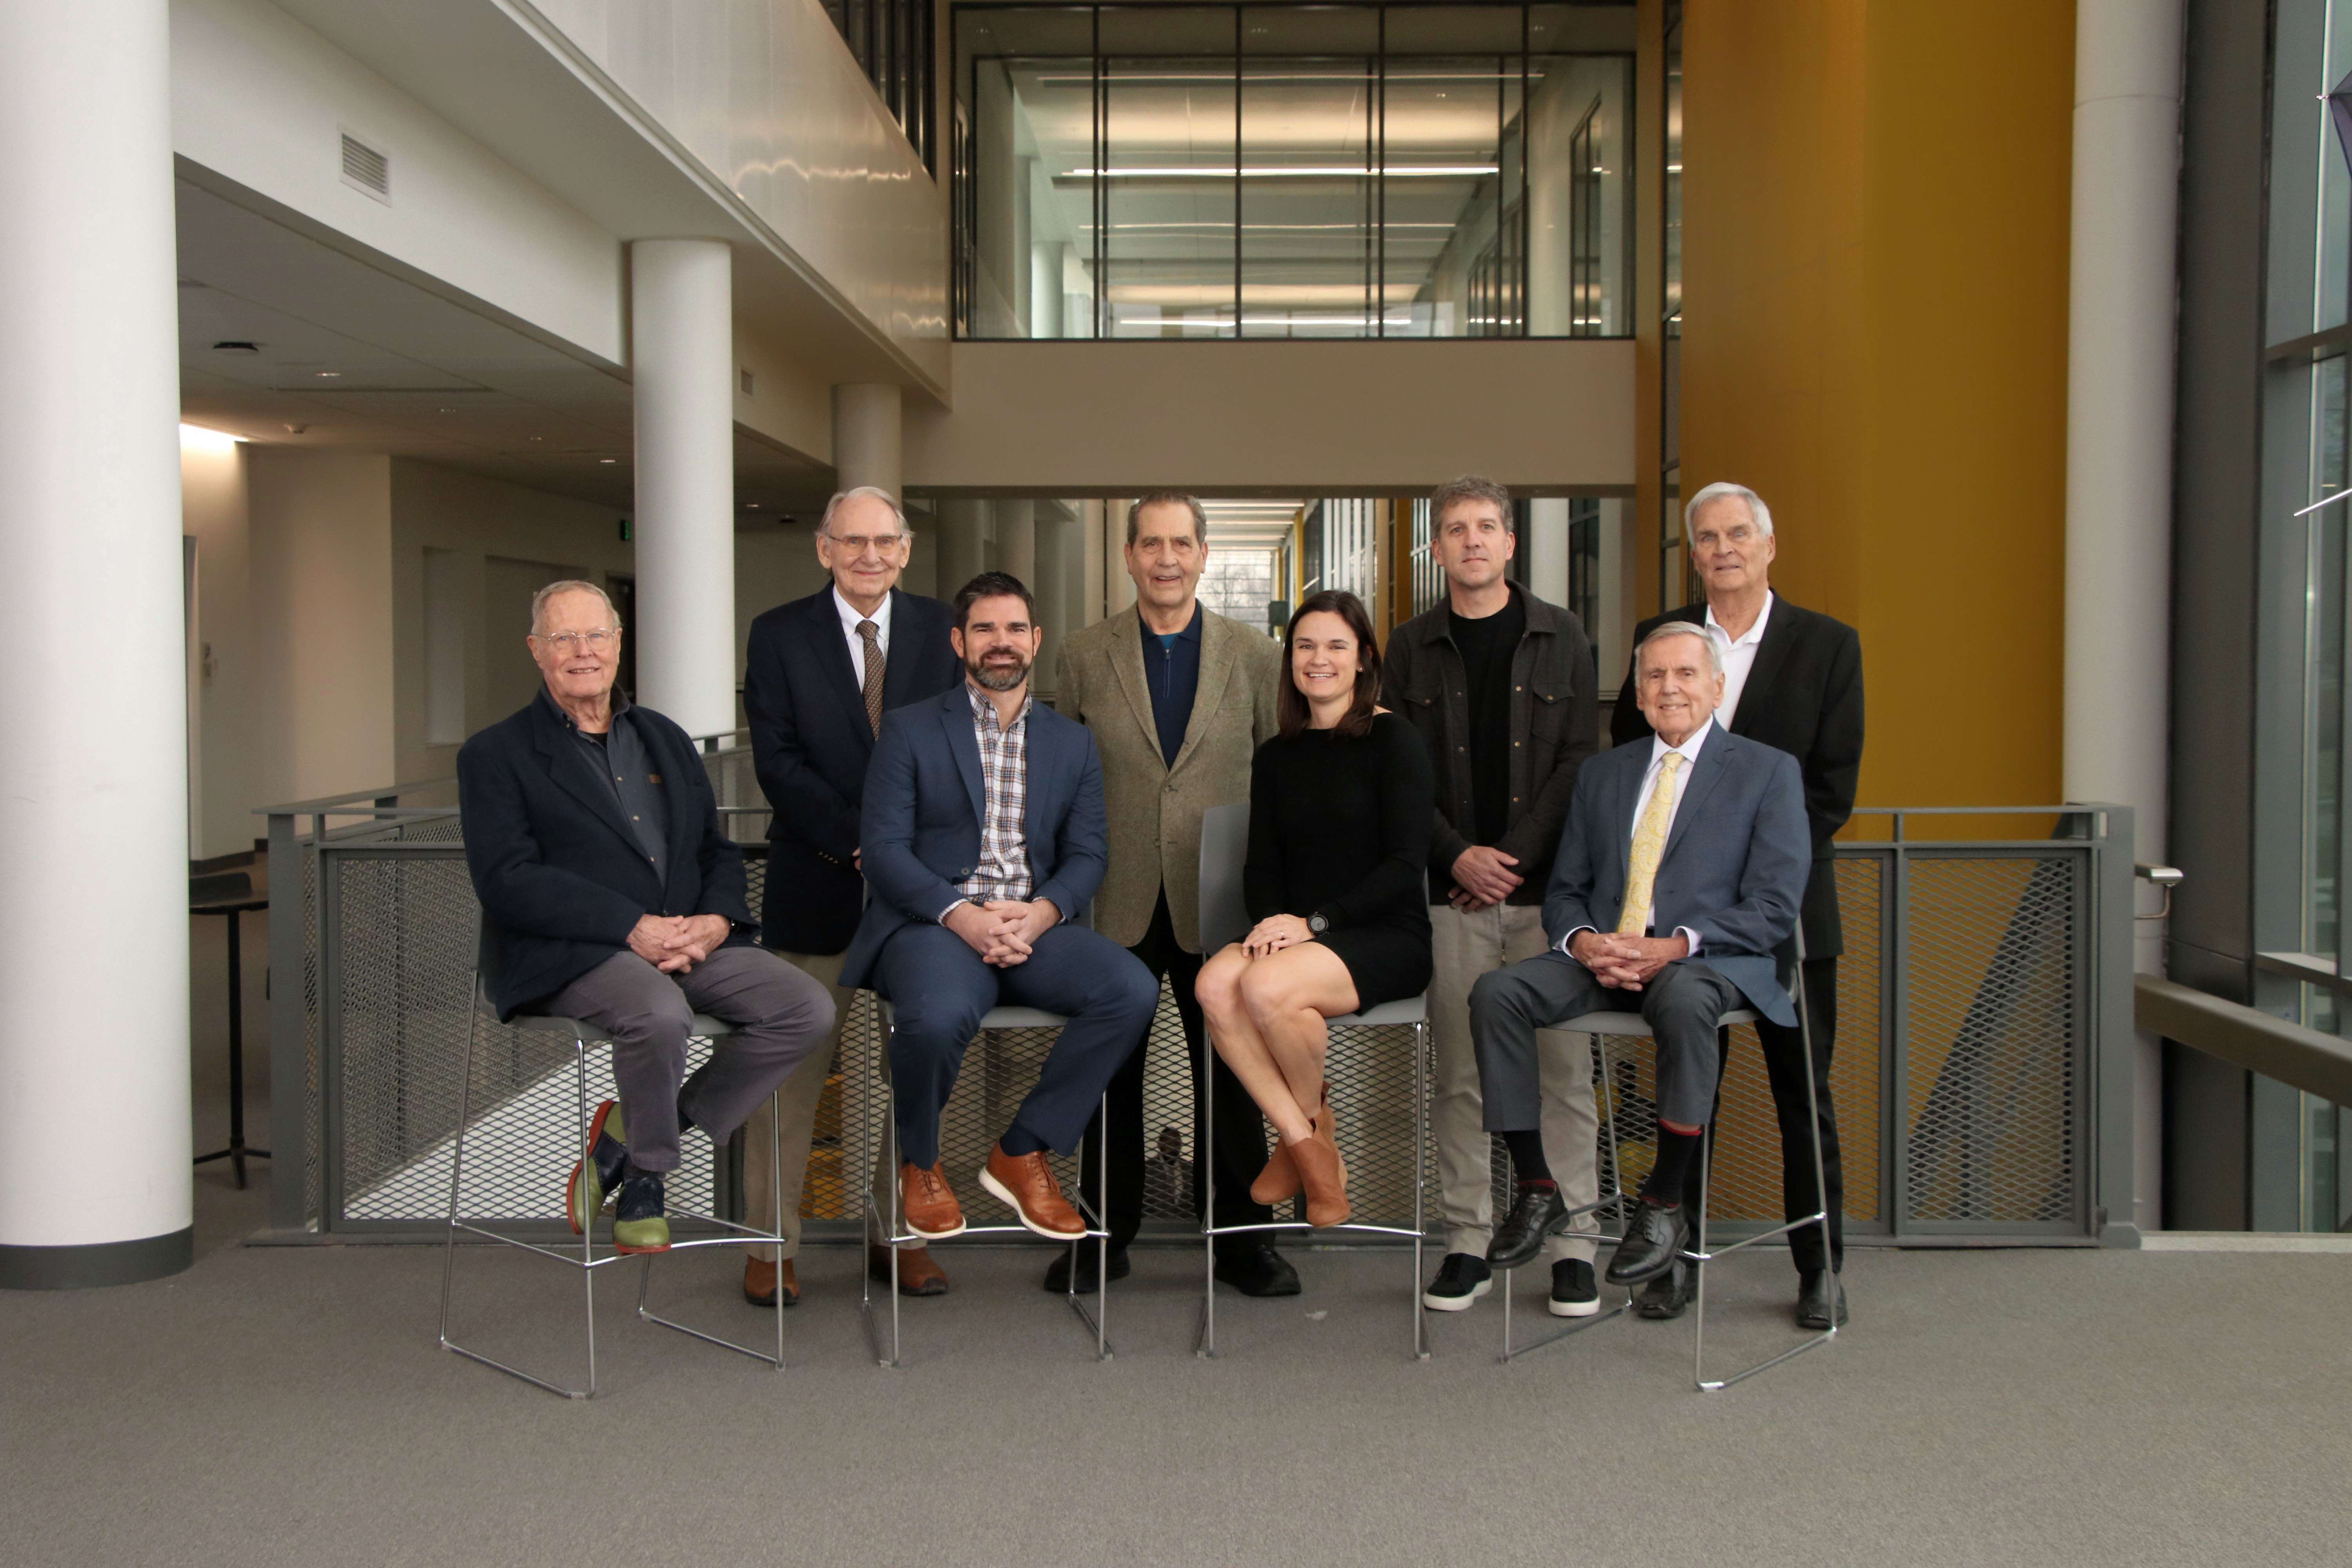 Eight inductees to the Upper Arlington High School Athletic Hall of Fame in 2023 - seated and standing overlooking Golden Bear Boulevard in the high school